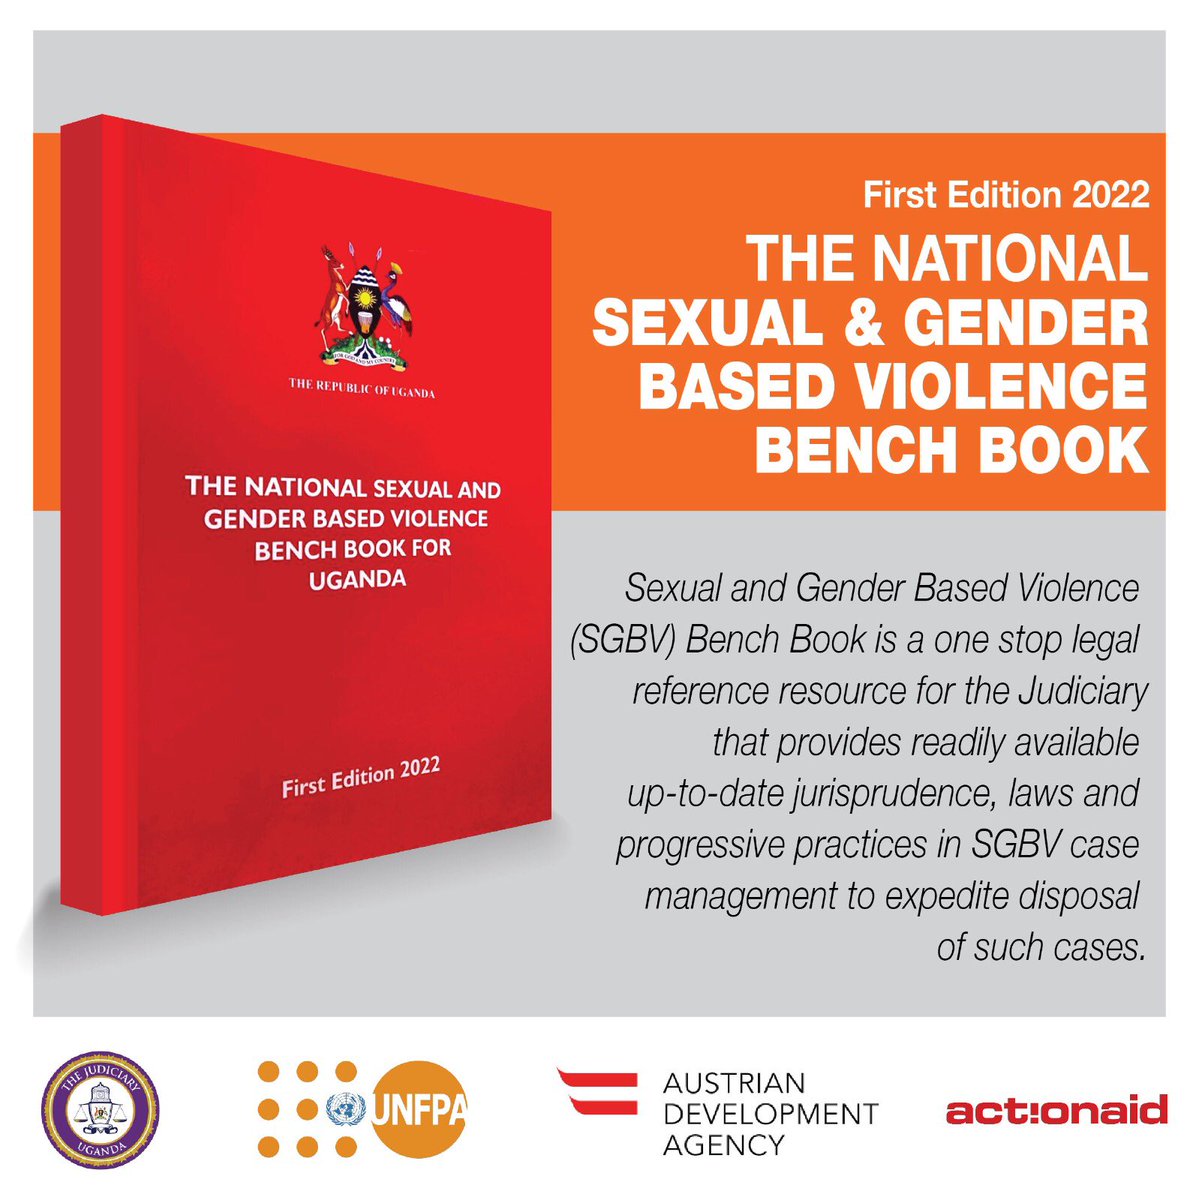 The Judiciary has a unique role in addressing SGBV and in crafting effective remedies for the benefit of victims. 

The National SGBV Bench Book is a one stop legal reference resource for the Judiciary that will improve access to justice for survivors.

#EndGenderBasedViolence